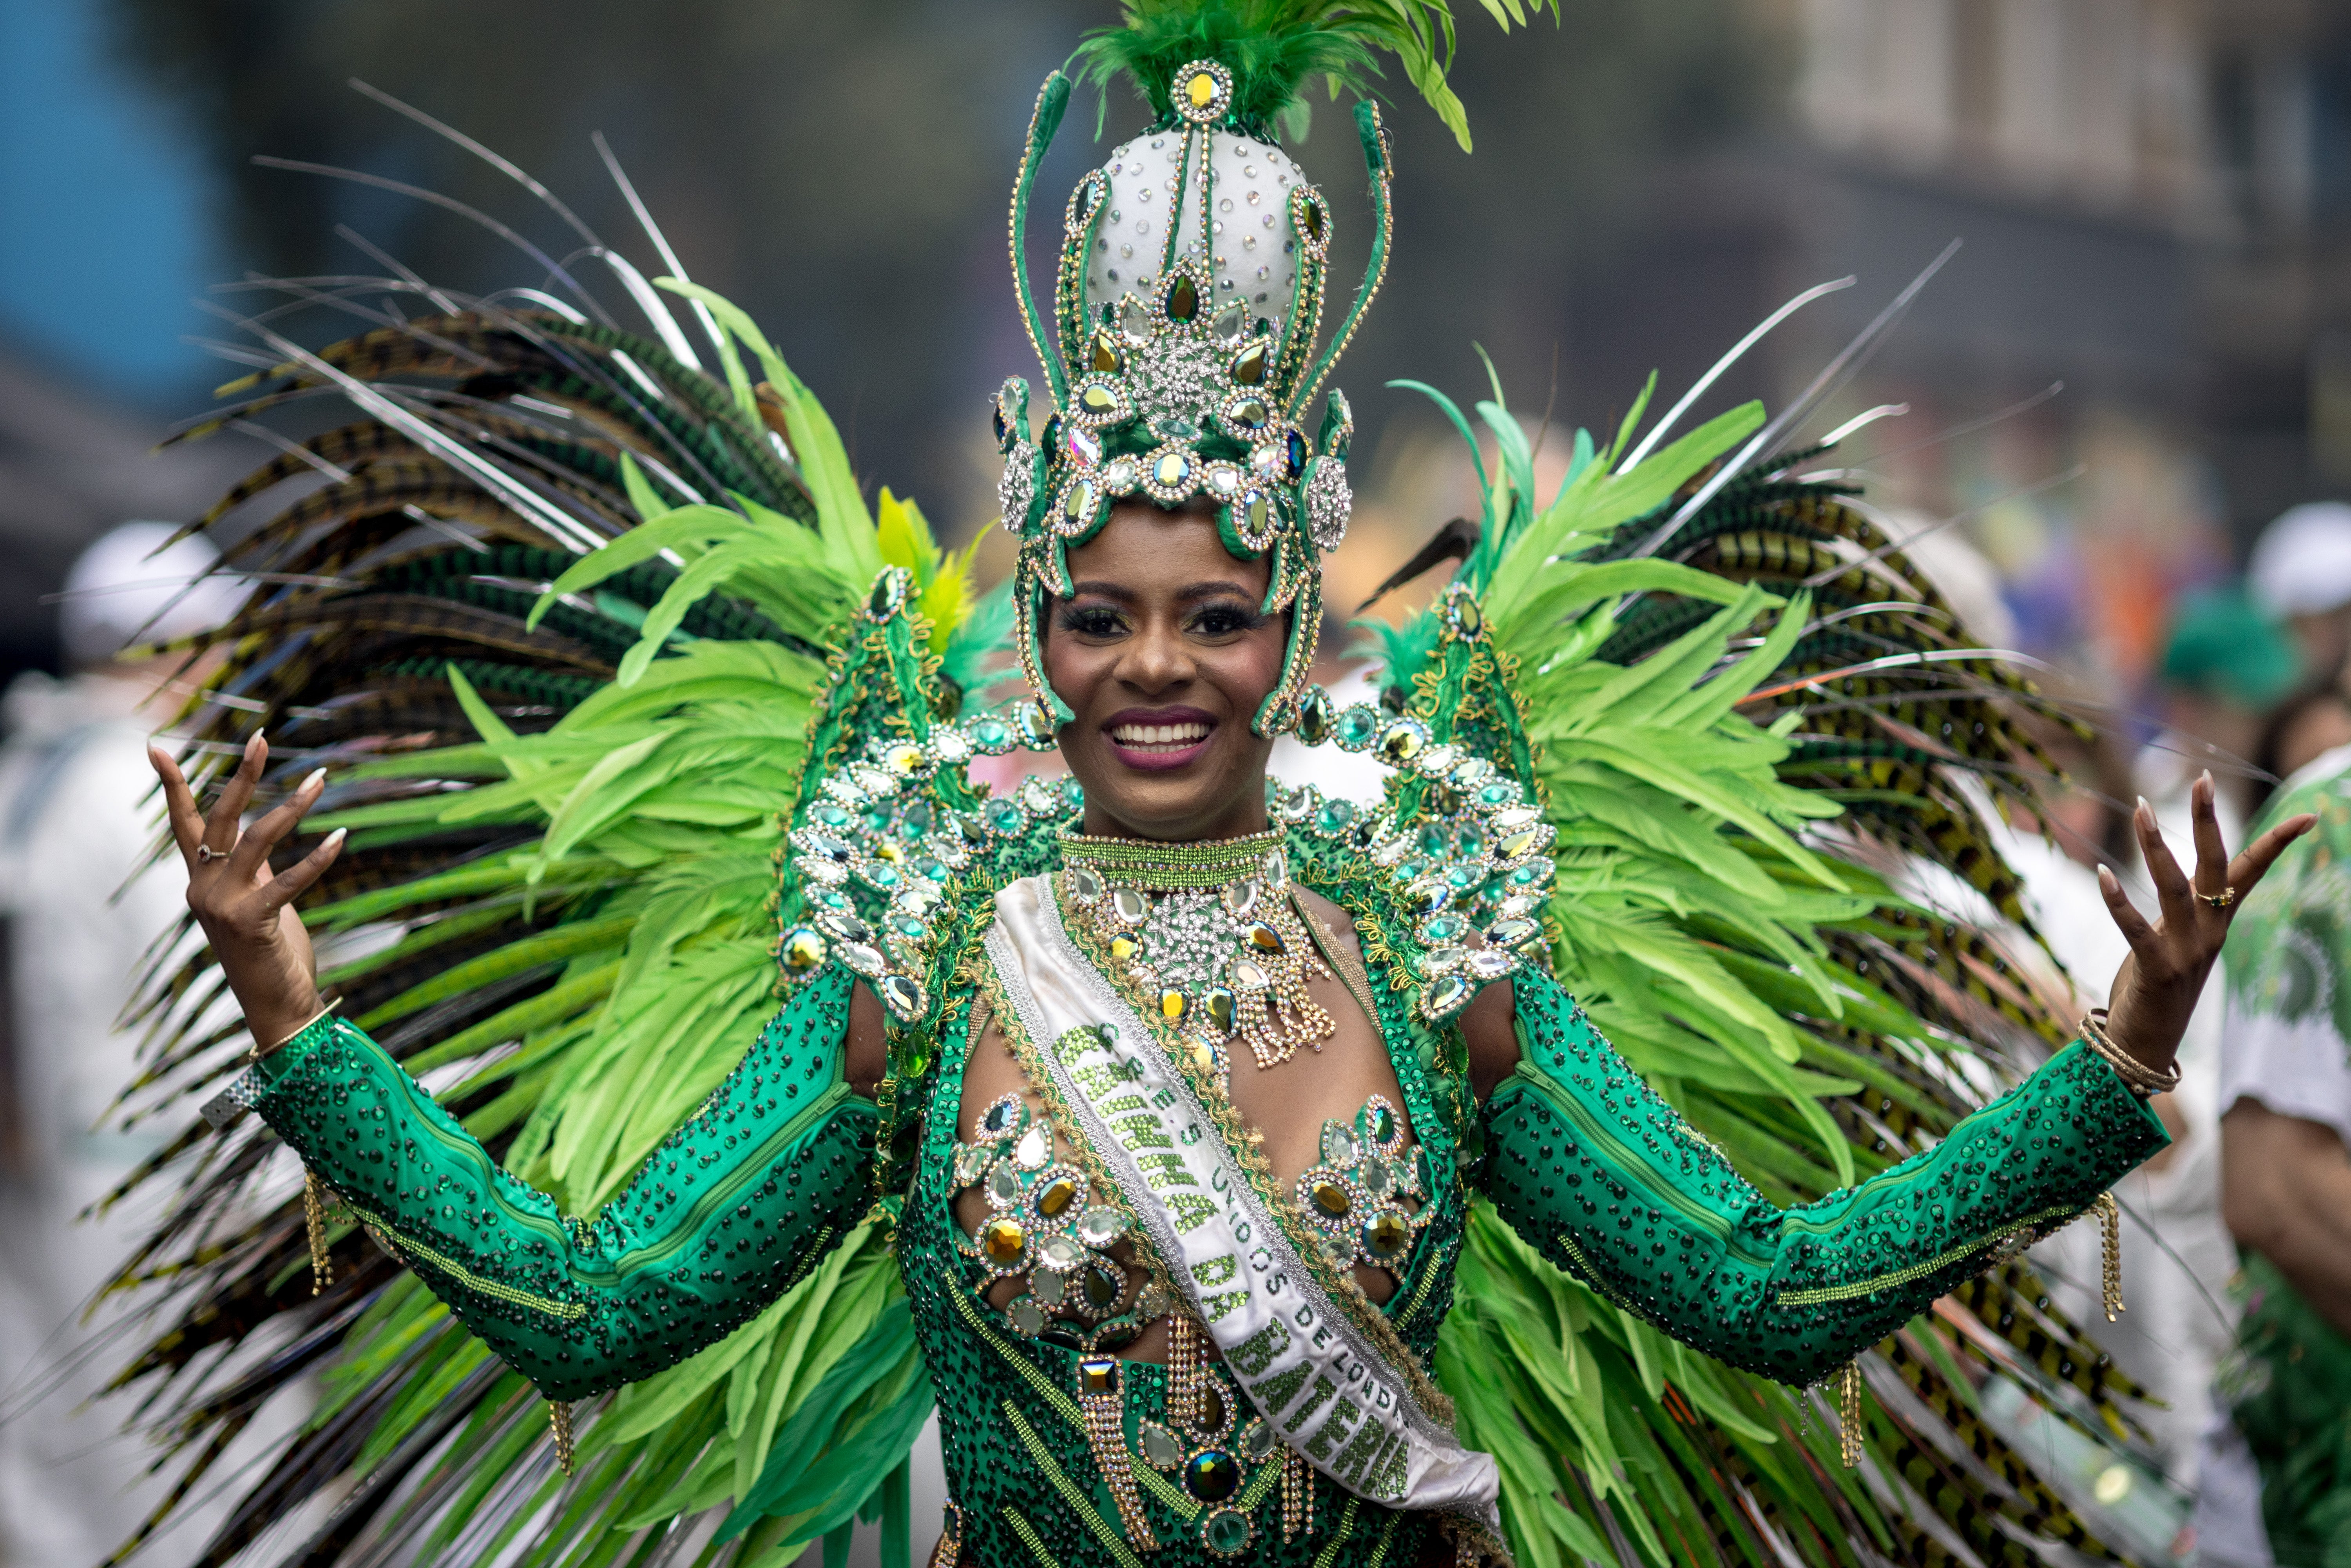 A performer parades in costume on the final day of Notting Hill Carnival